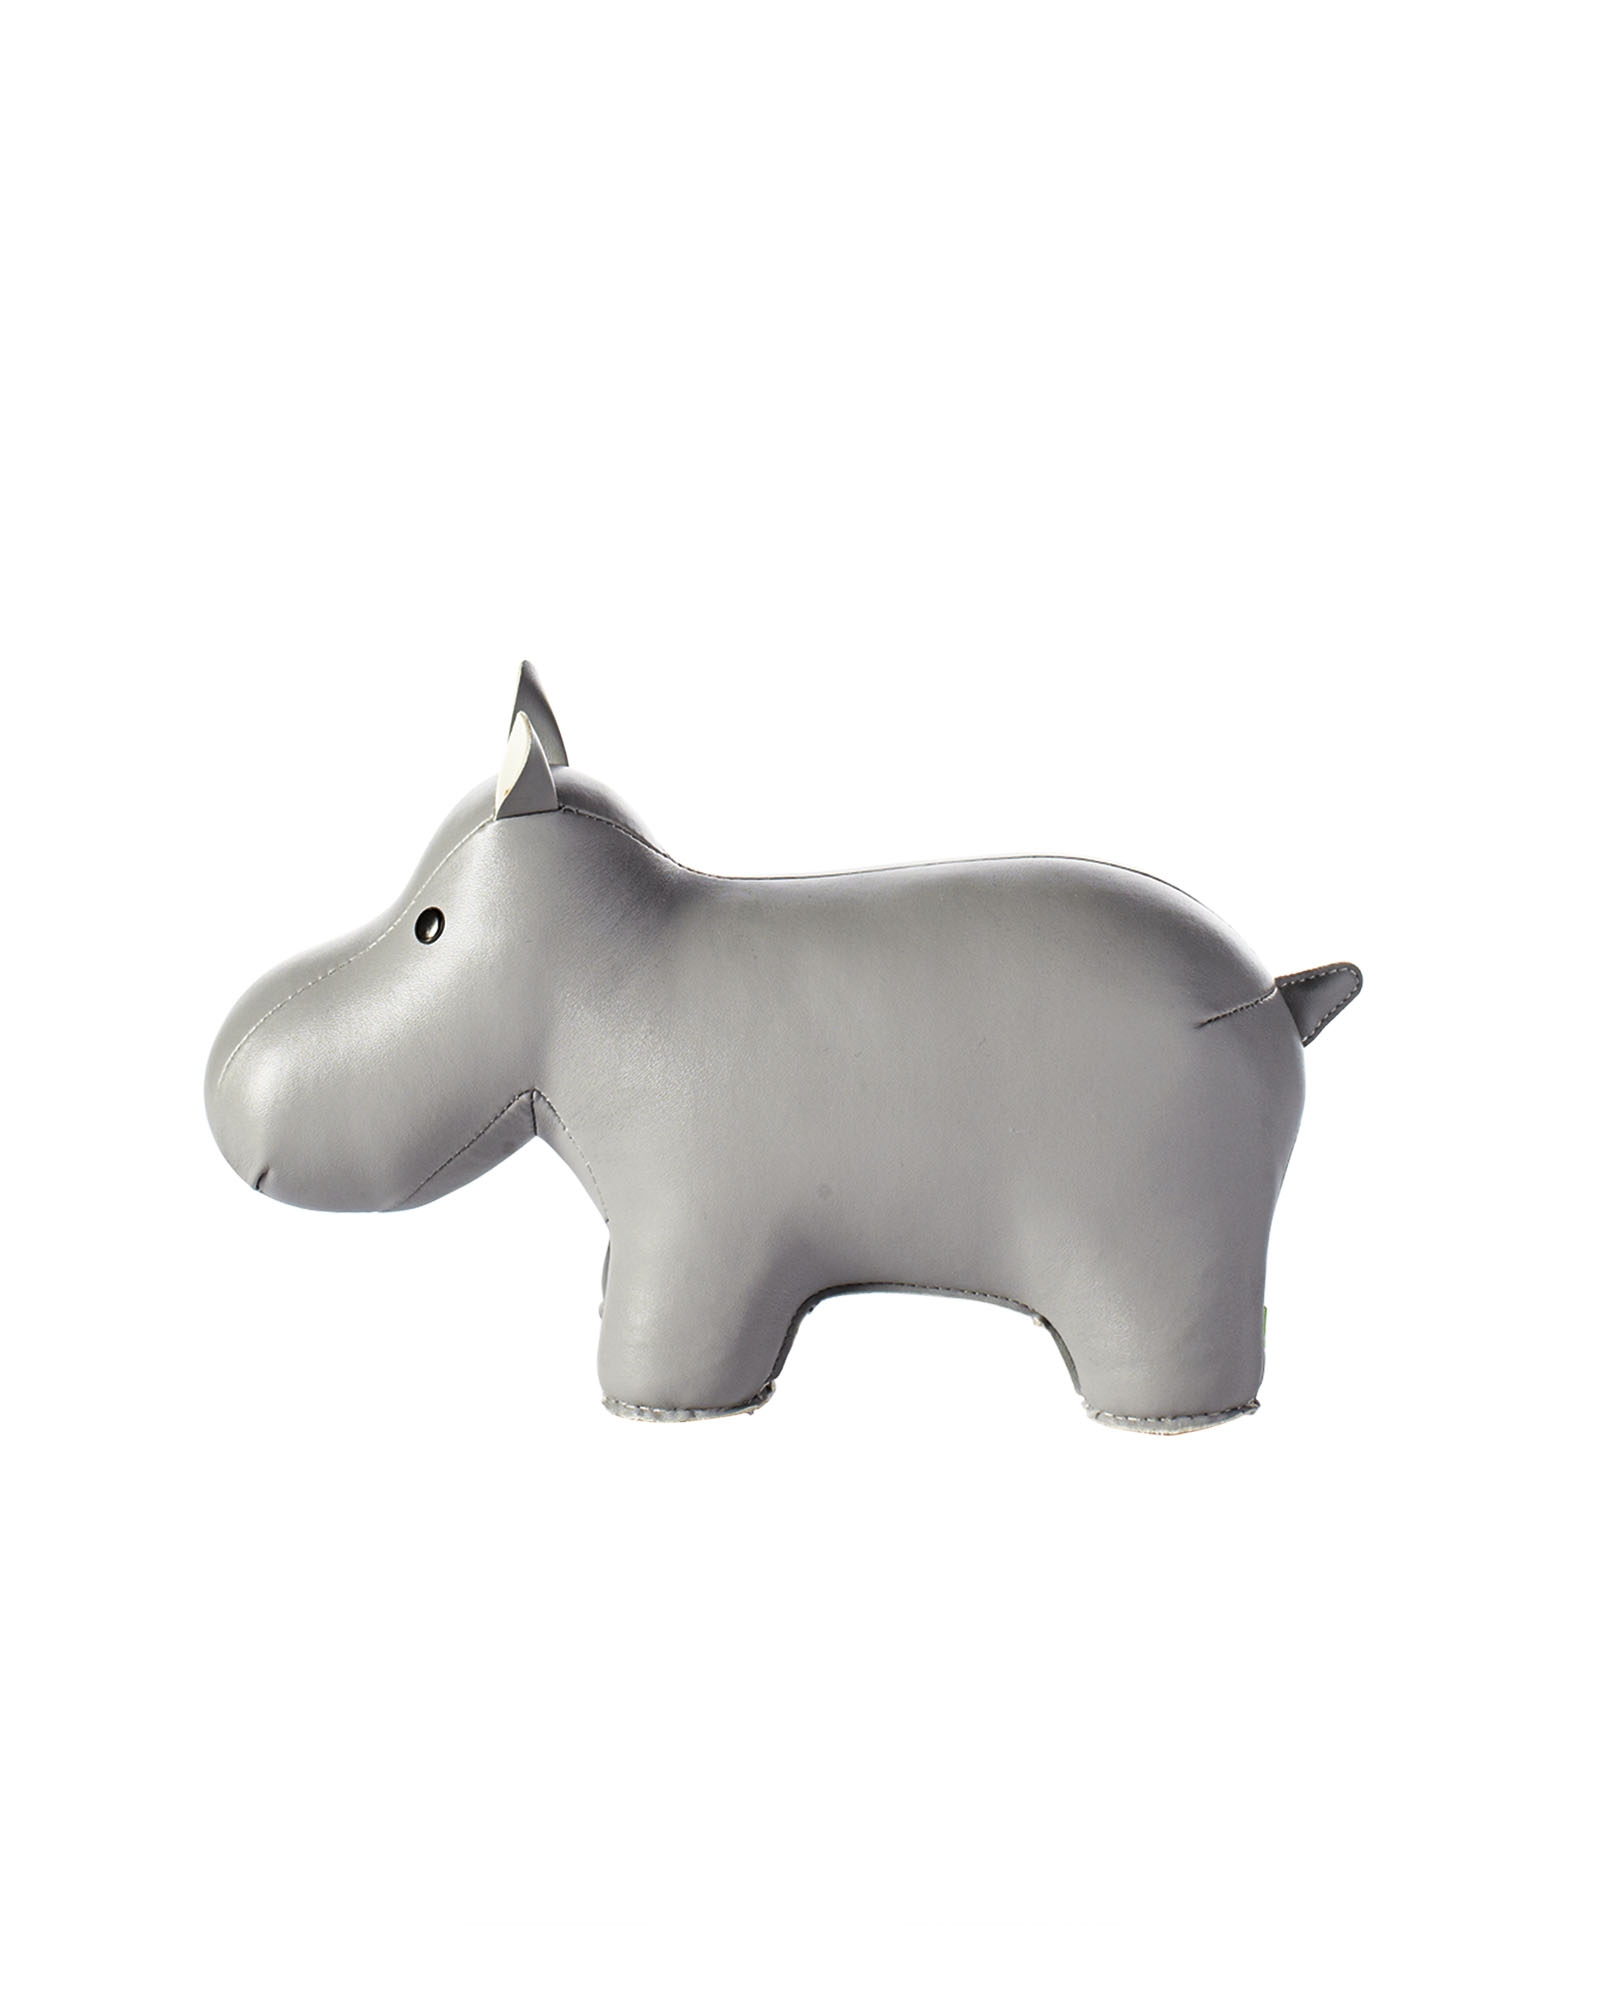 Menagerie Bookend - Hippo - Image 0